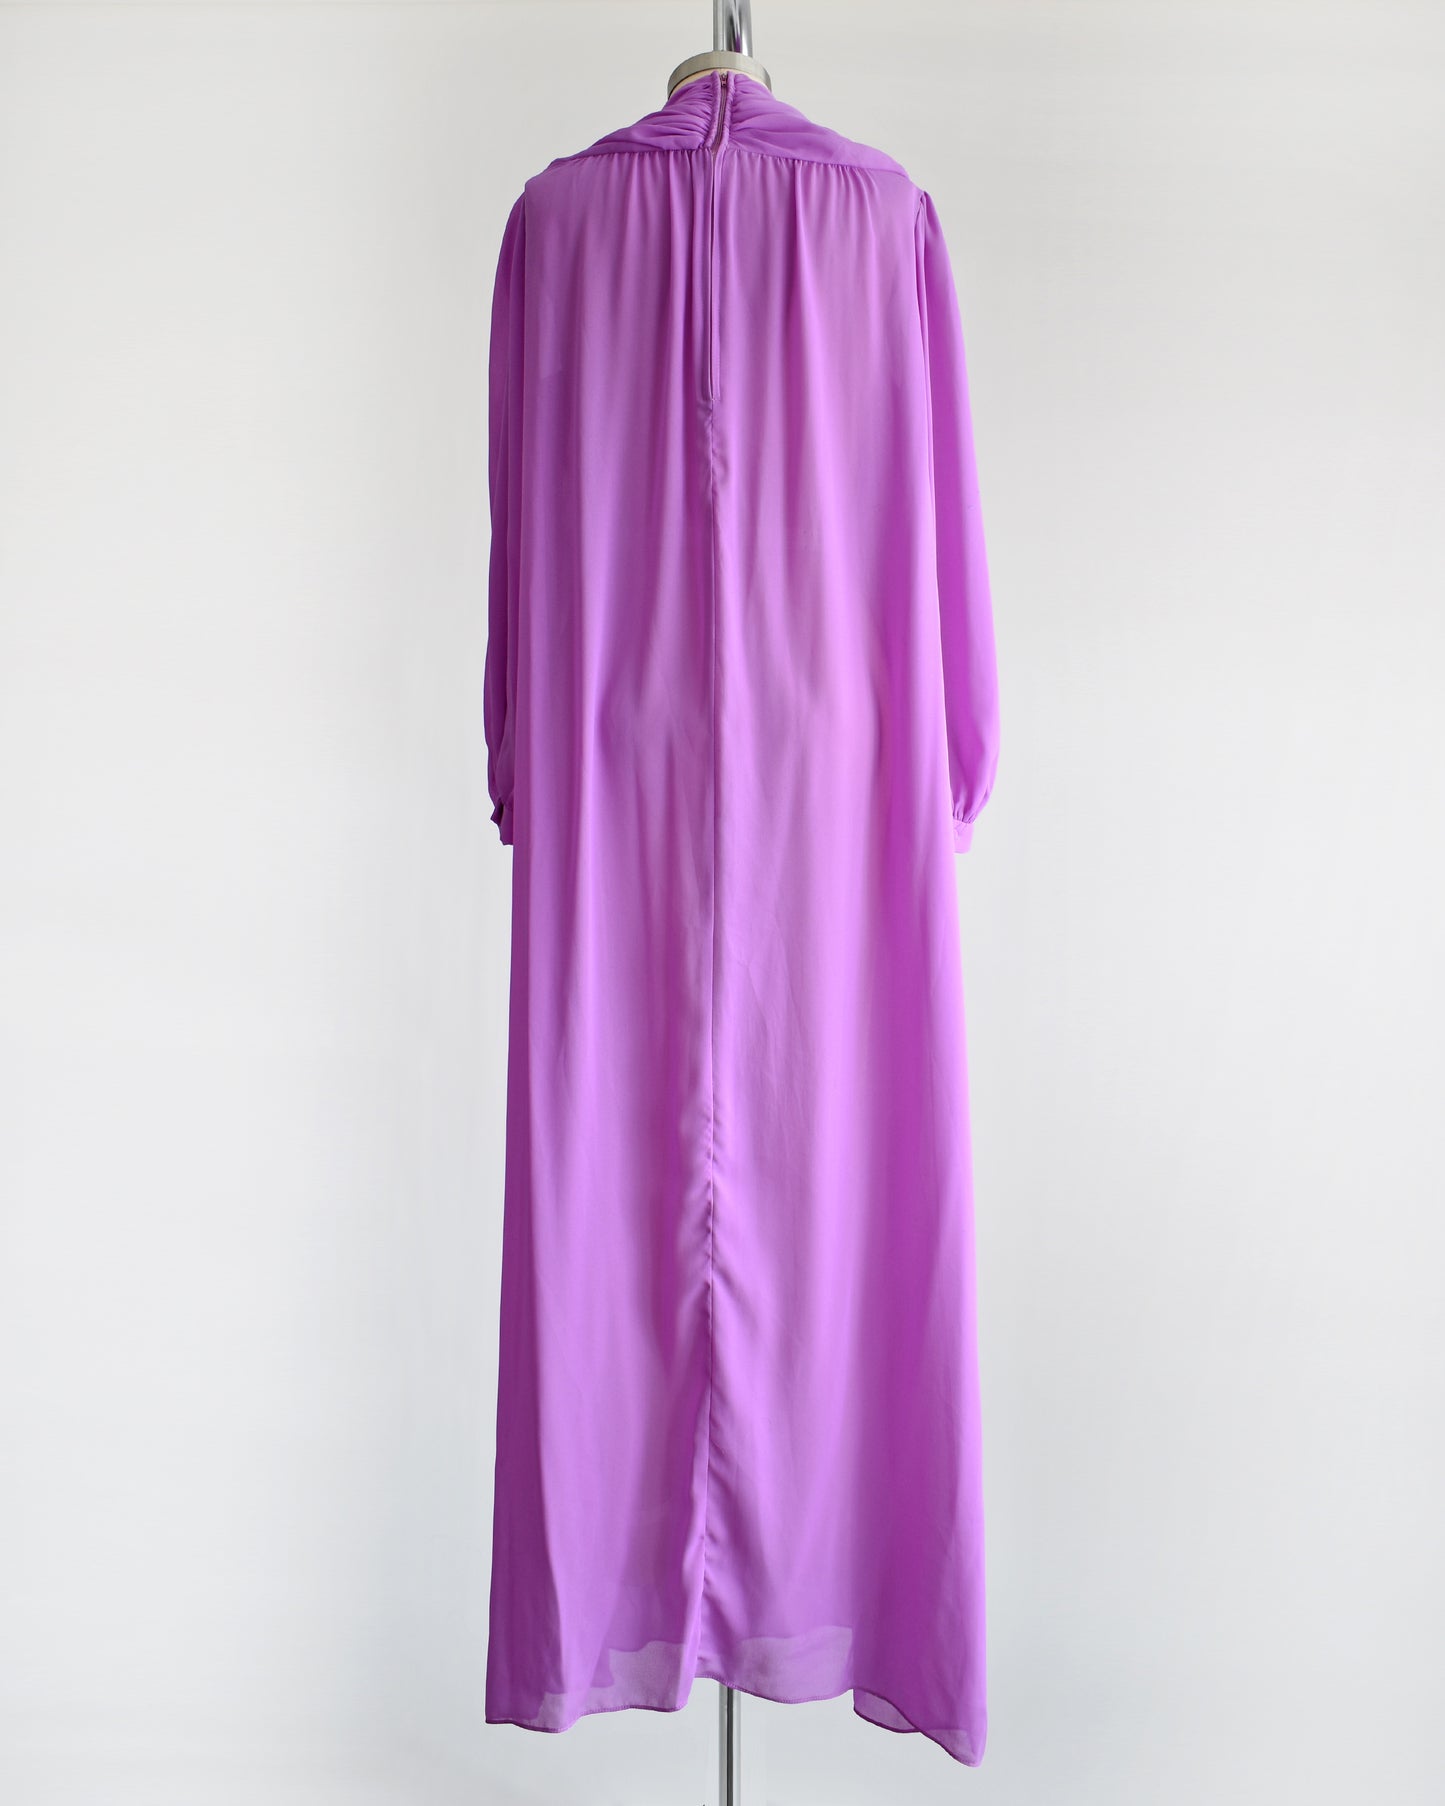 back view of a vintage 1970s purple semi sheer maxi dress by Joy Stevens California that has a draped neckline and long sleeves